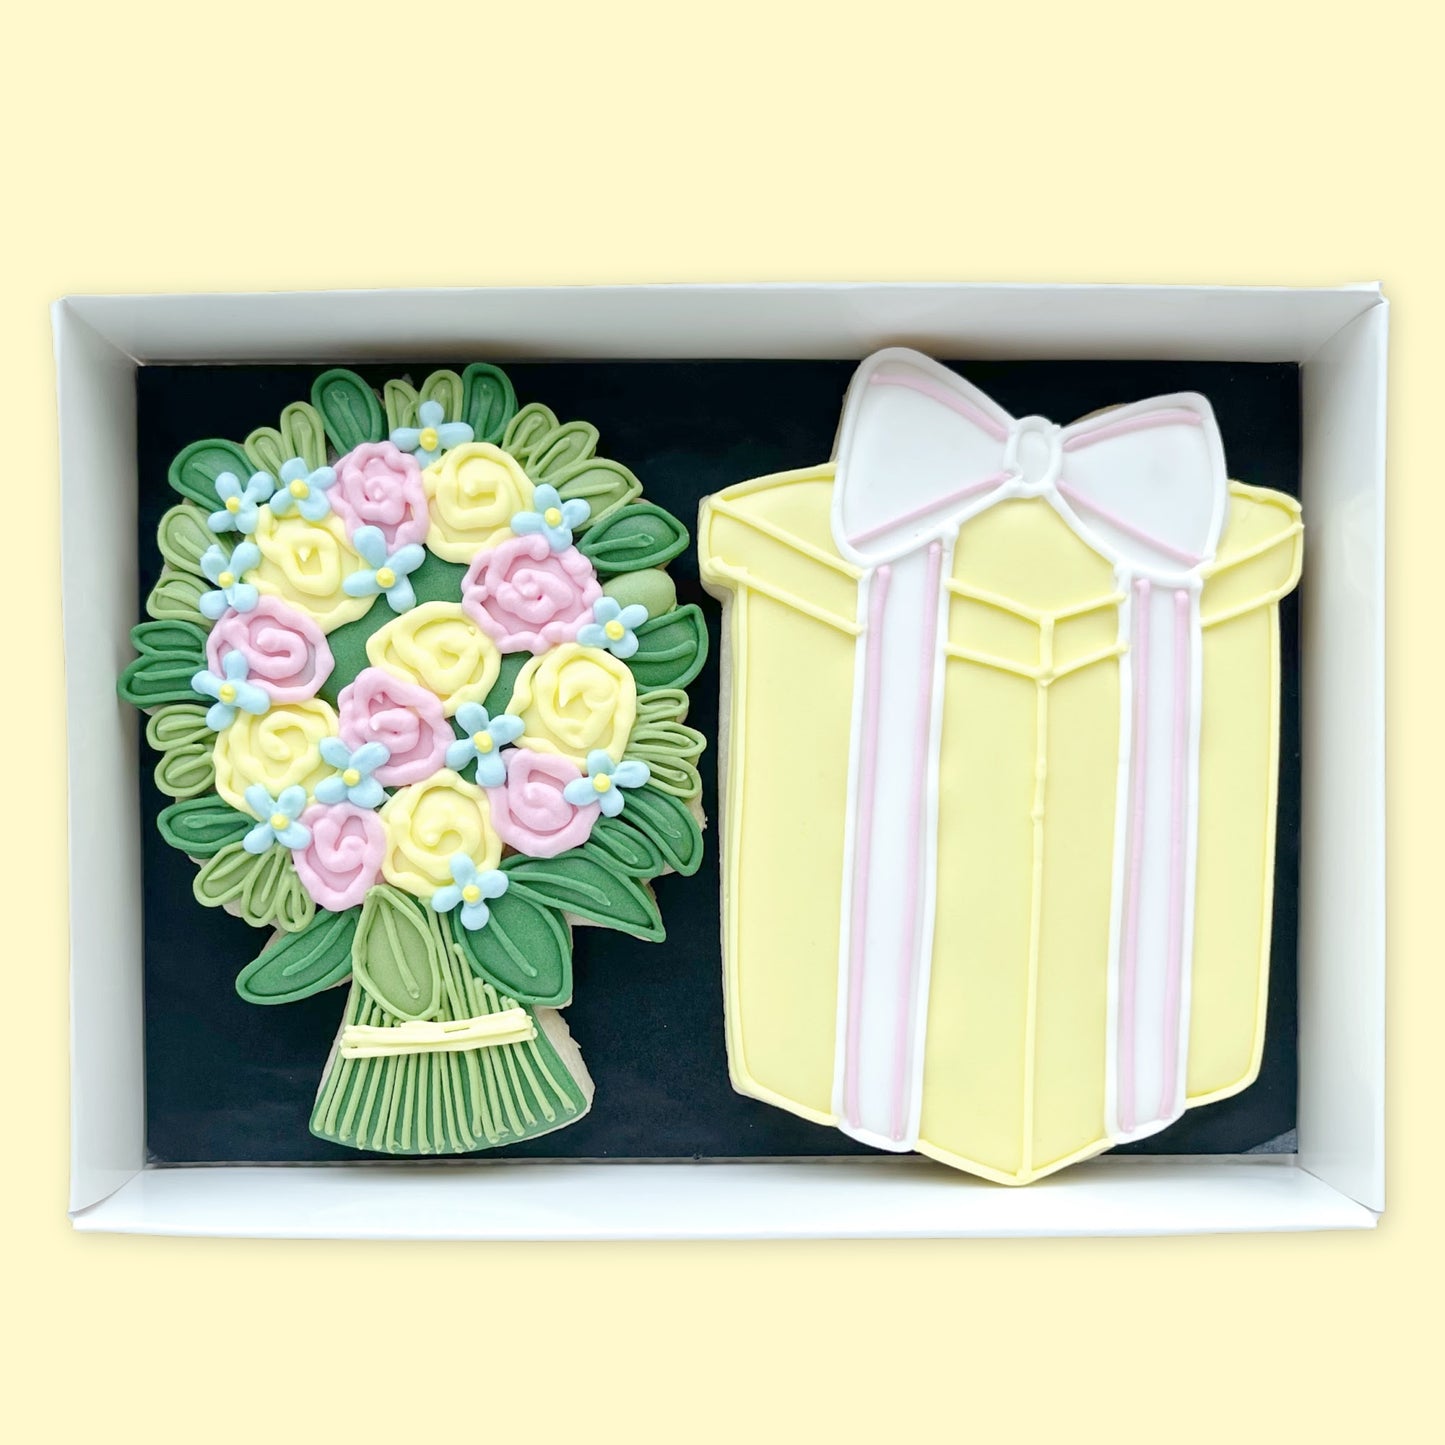 hand iced flower bouquet and gfit with bow  biscuits in yellow pink blue and green in a open white gift box by Katie's Biscuit shop 